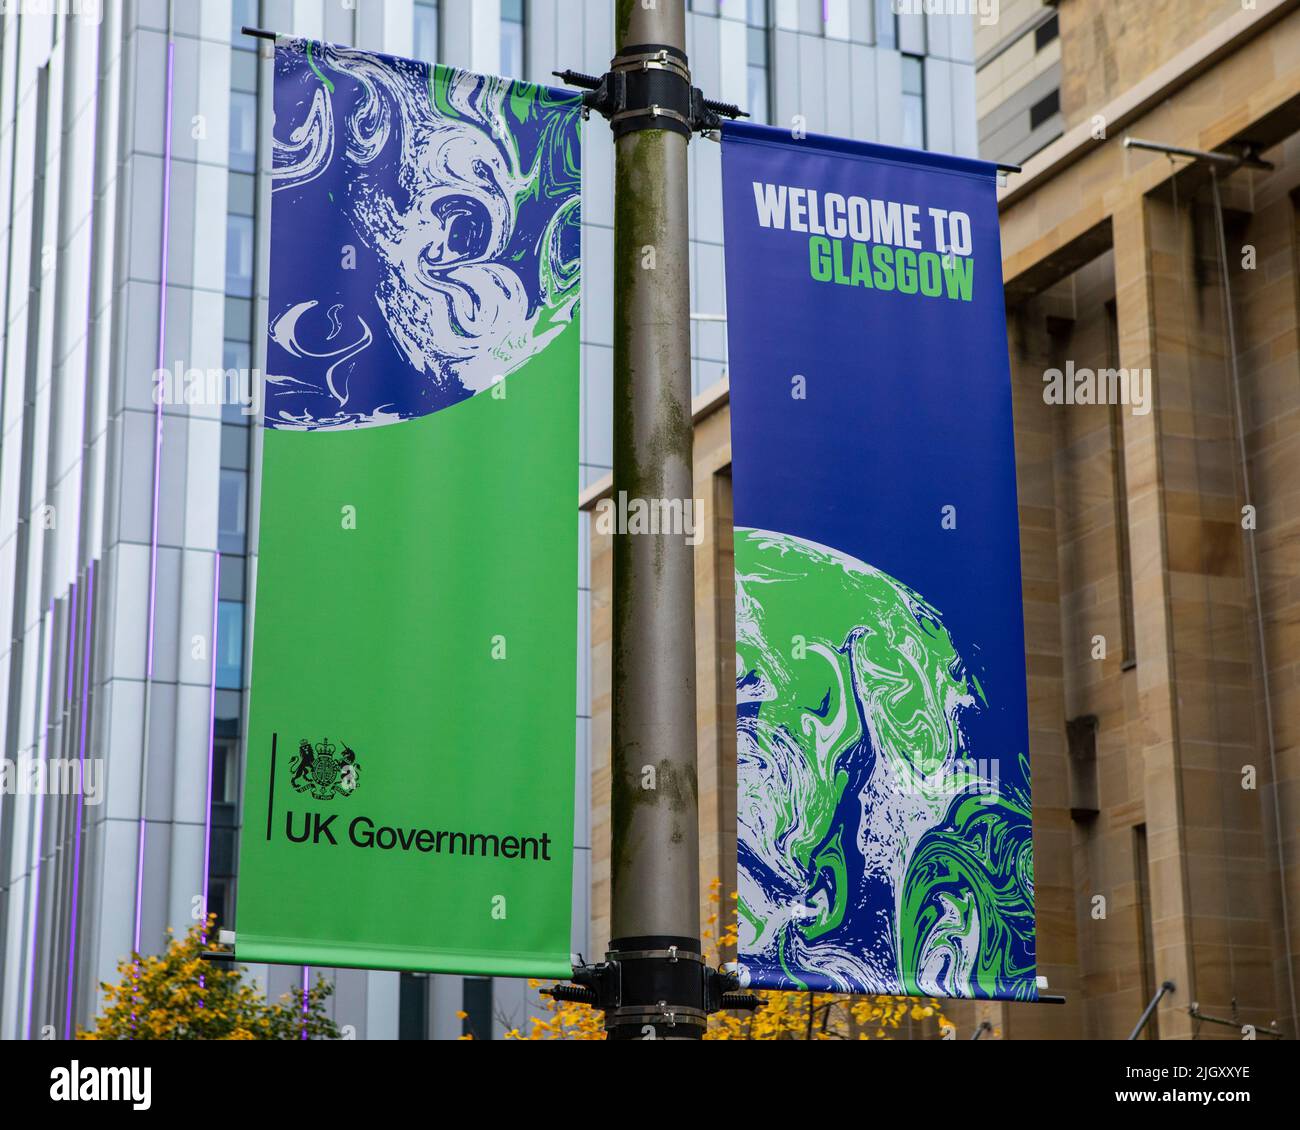 Glasgow, Scotland - October 12th 2021: A sign welcoming visitors to the city of Glasgow in Scotland, coinciding with the UN Climate Change Conference Stock Photo